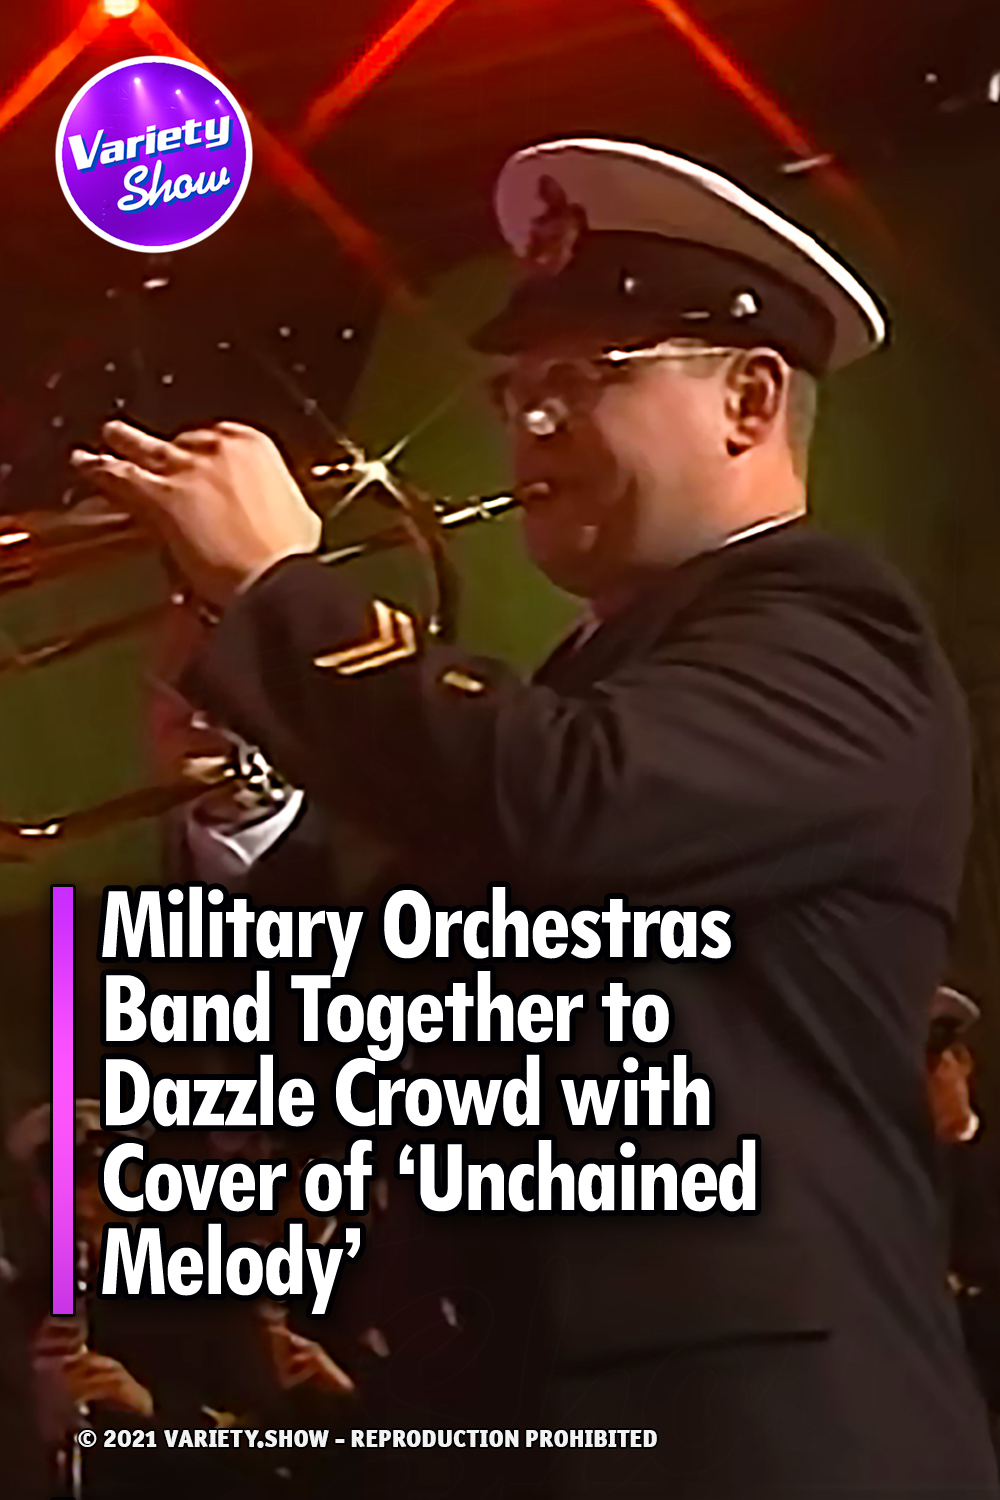 Military Orchestras Band Together to Dazzle Crowd with Cover of ‘Unchained Melody’